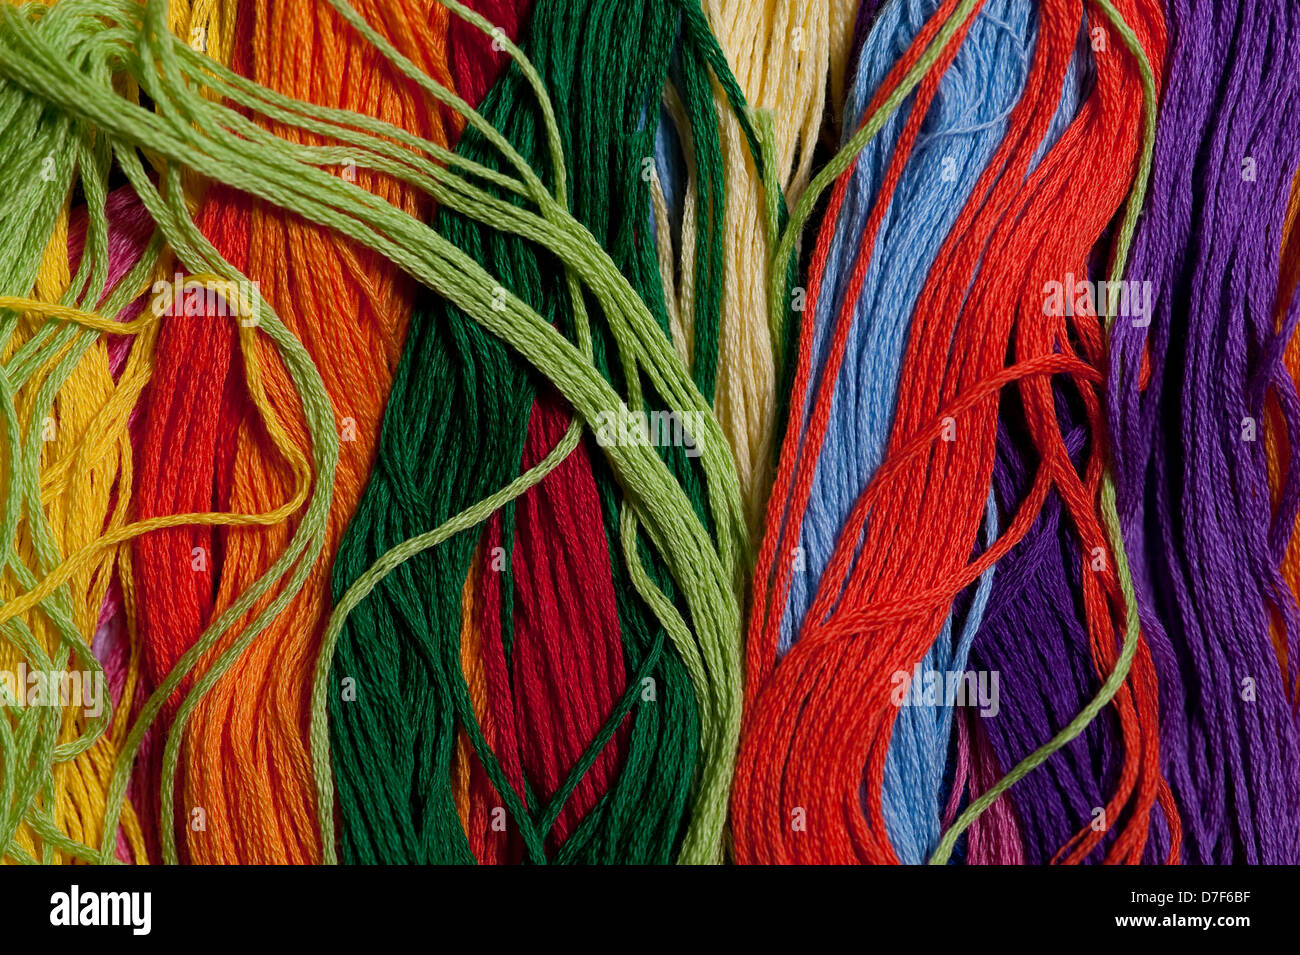 Multicolored embroidery thread mixed up and tangled Stock Photo